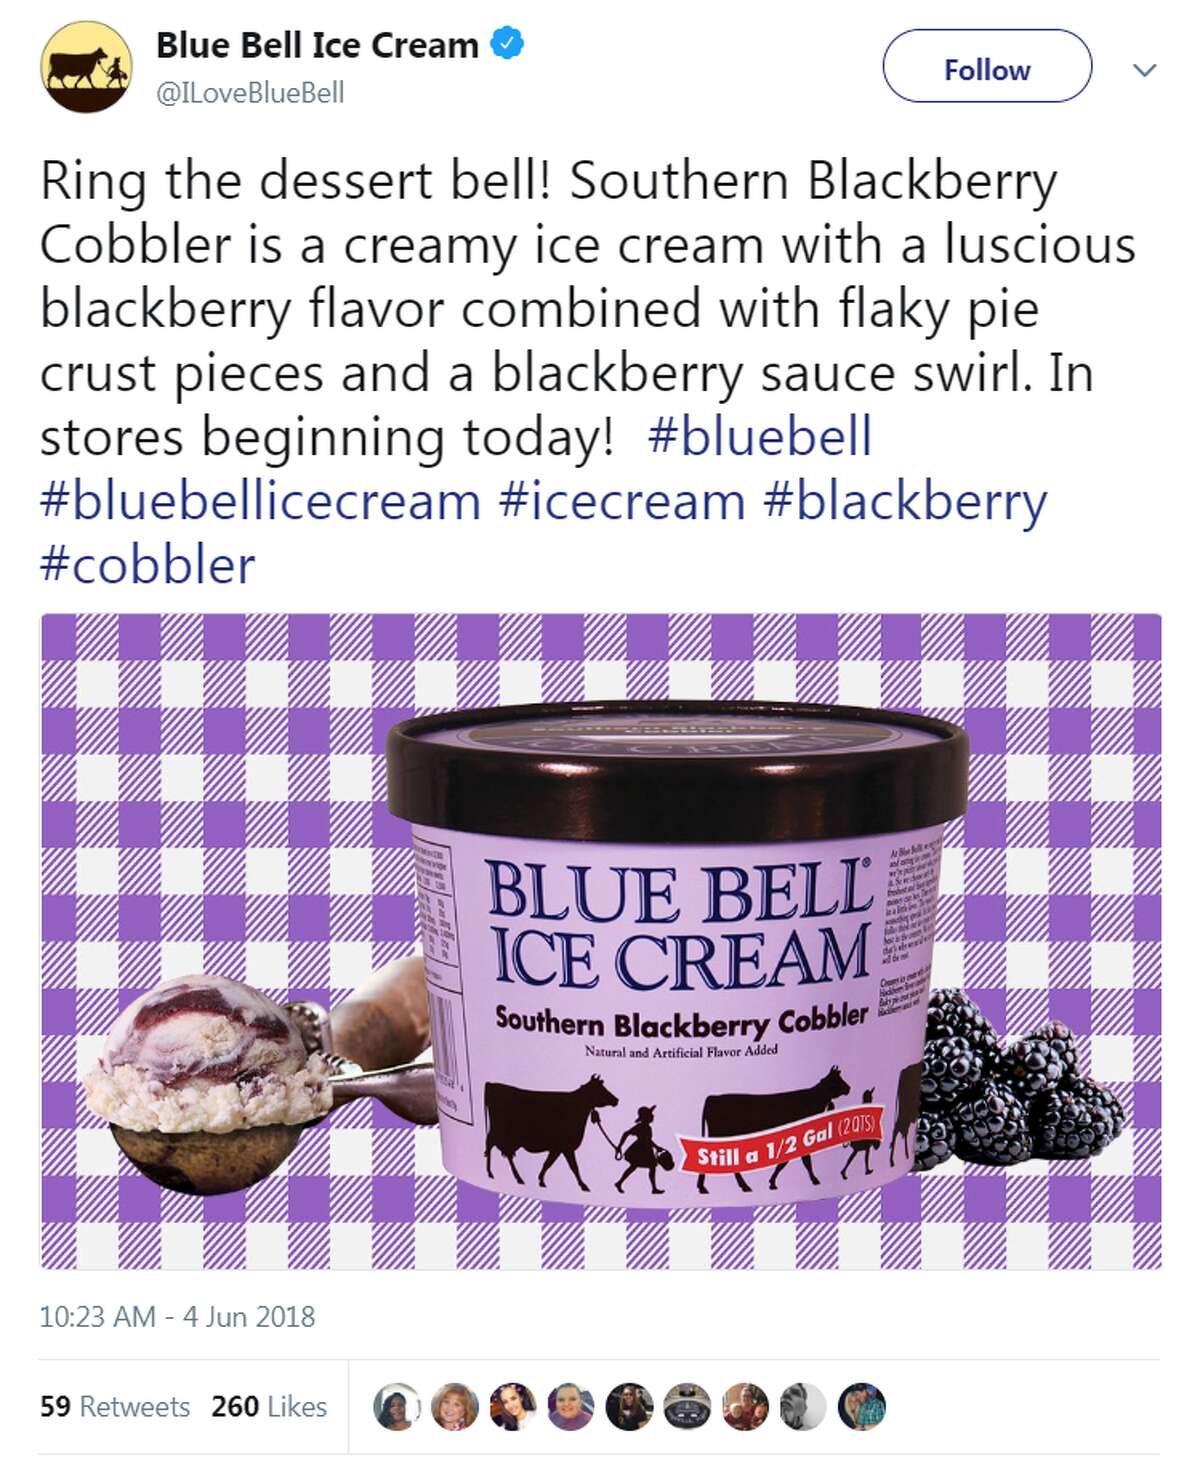 New Blue Bell flavor hits shelves today